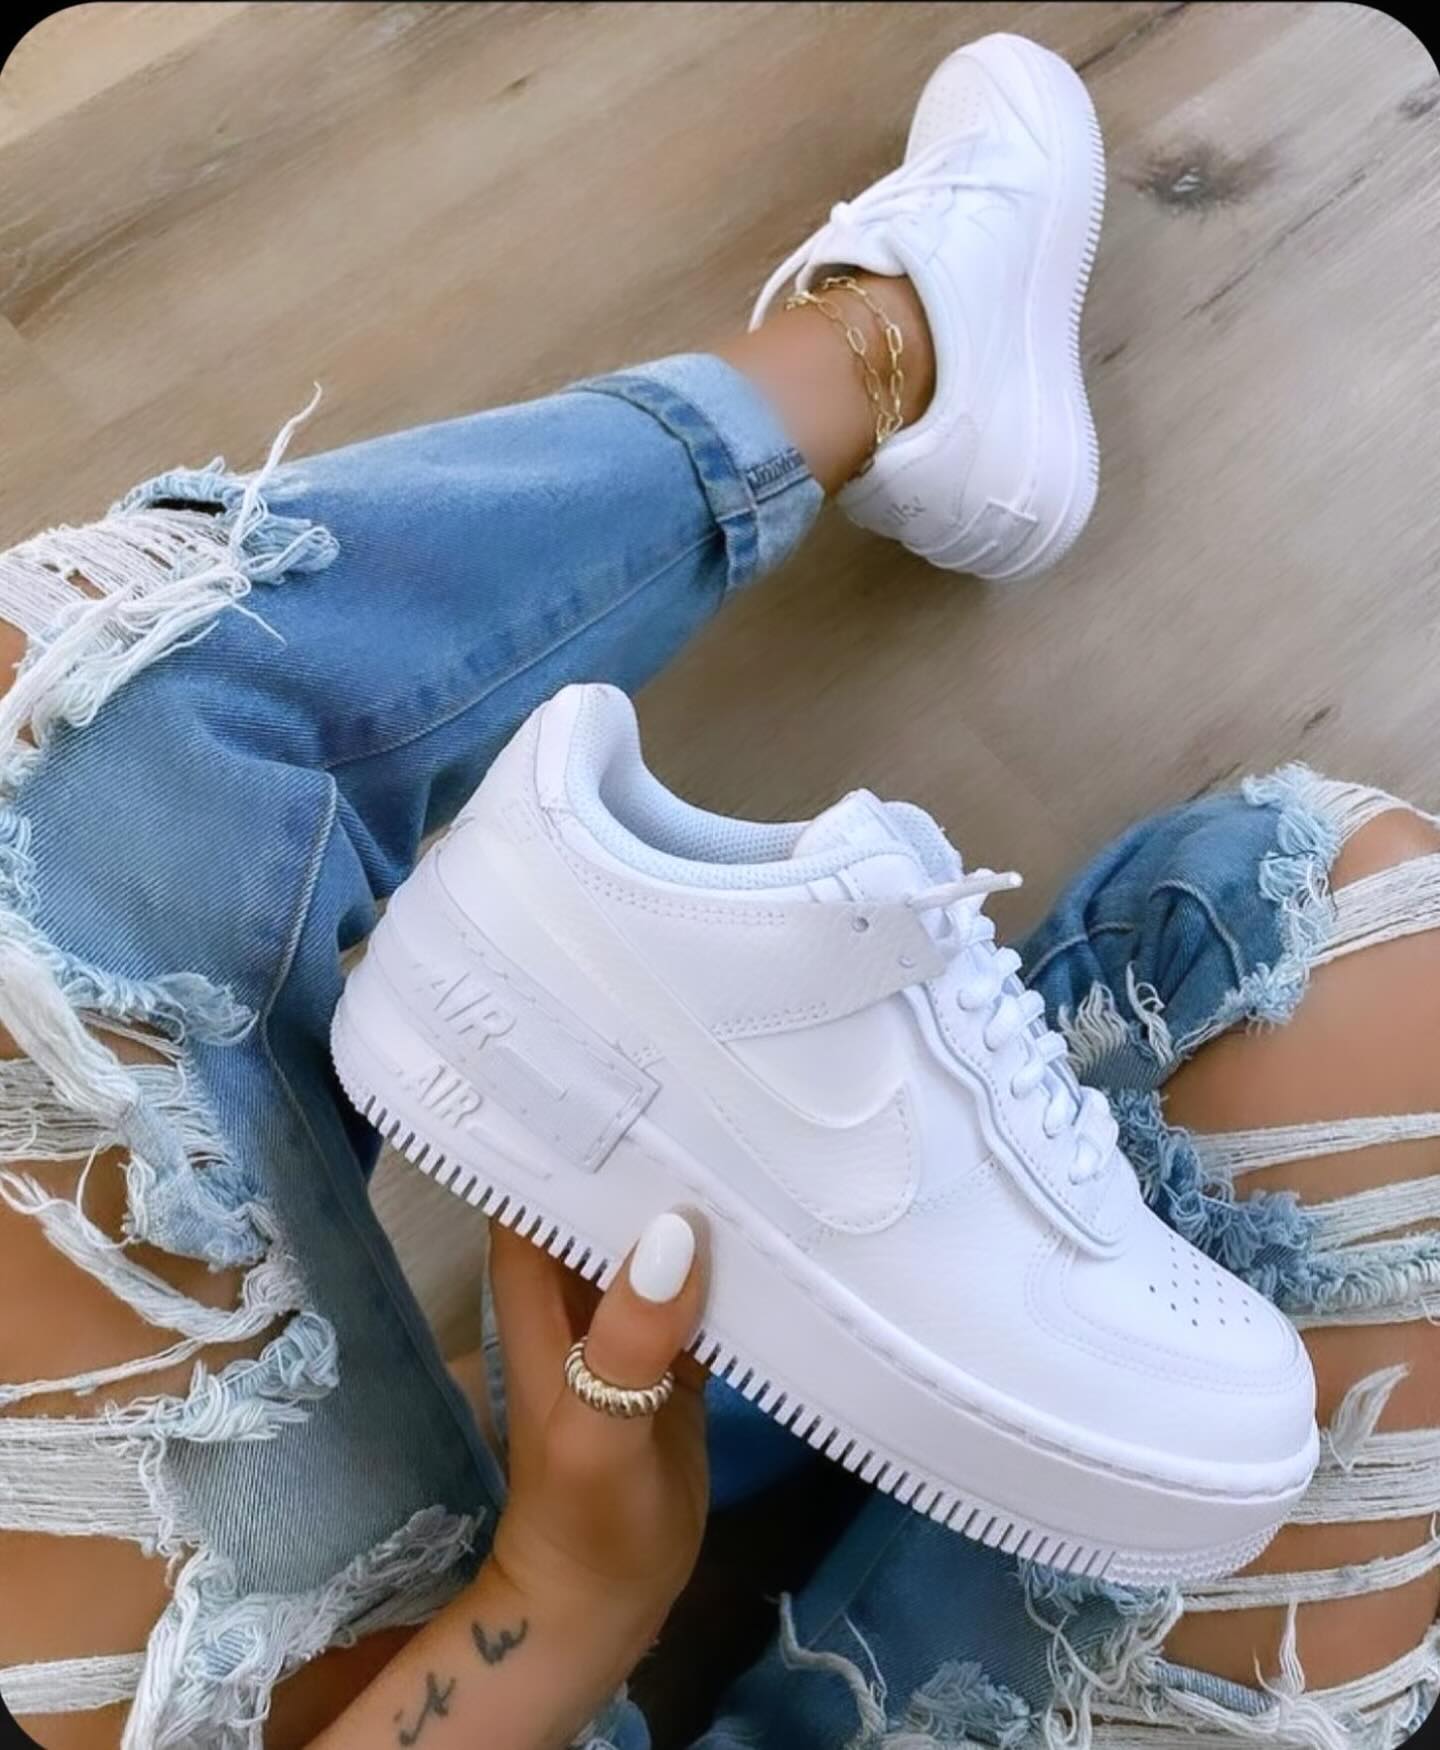 AIR FORCE 1 CLASSIC ALL WHITE CASUAL SNEAKERS FOR MEN